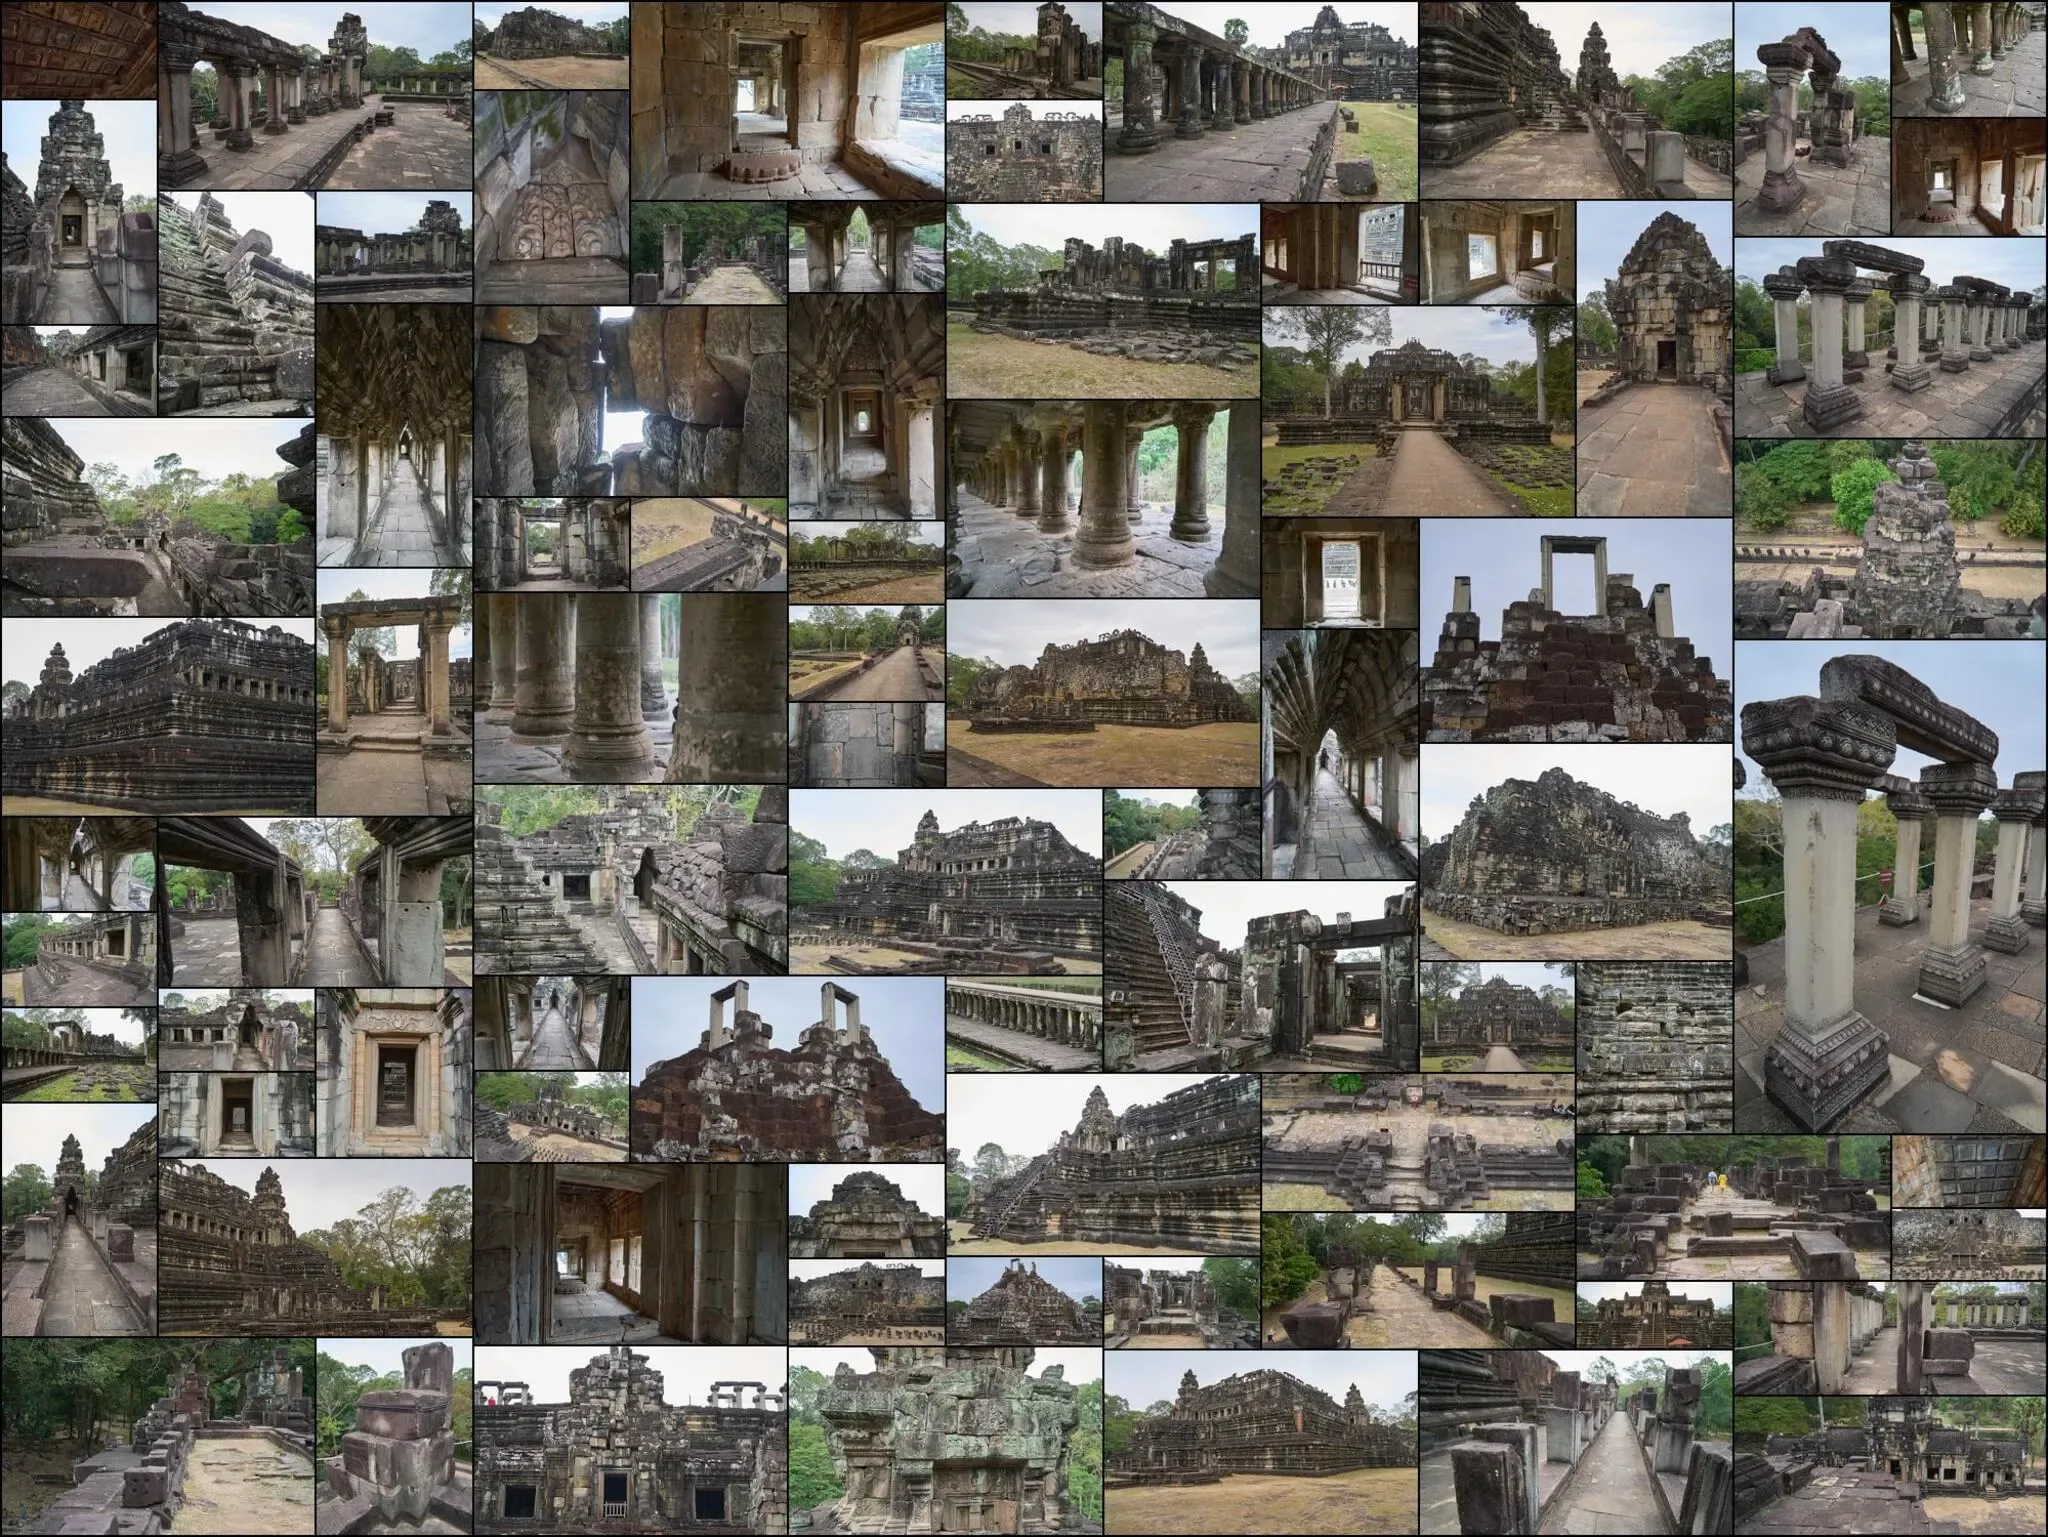 167 photos of Stepped Ancient Khmer Pyramid Temple